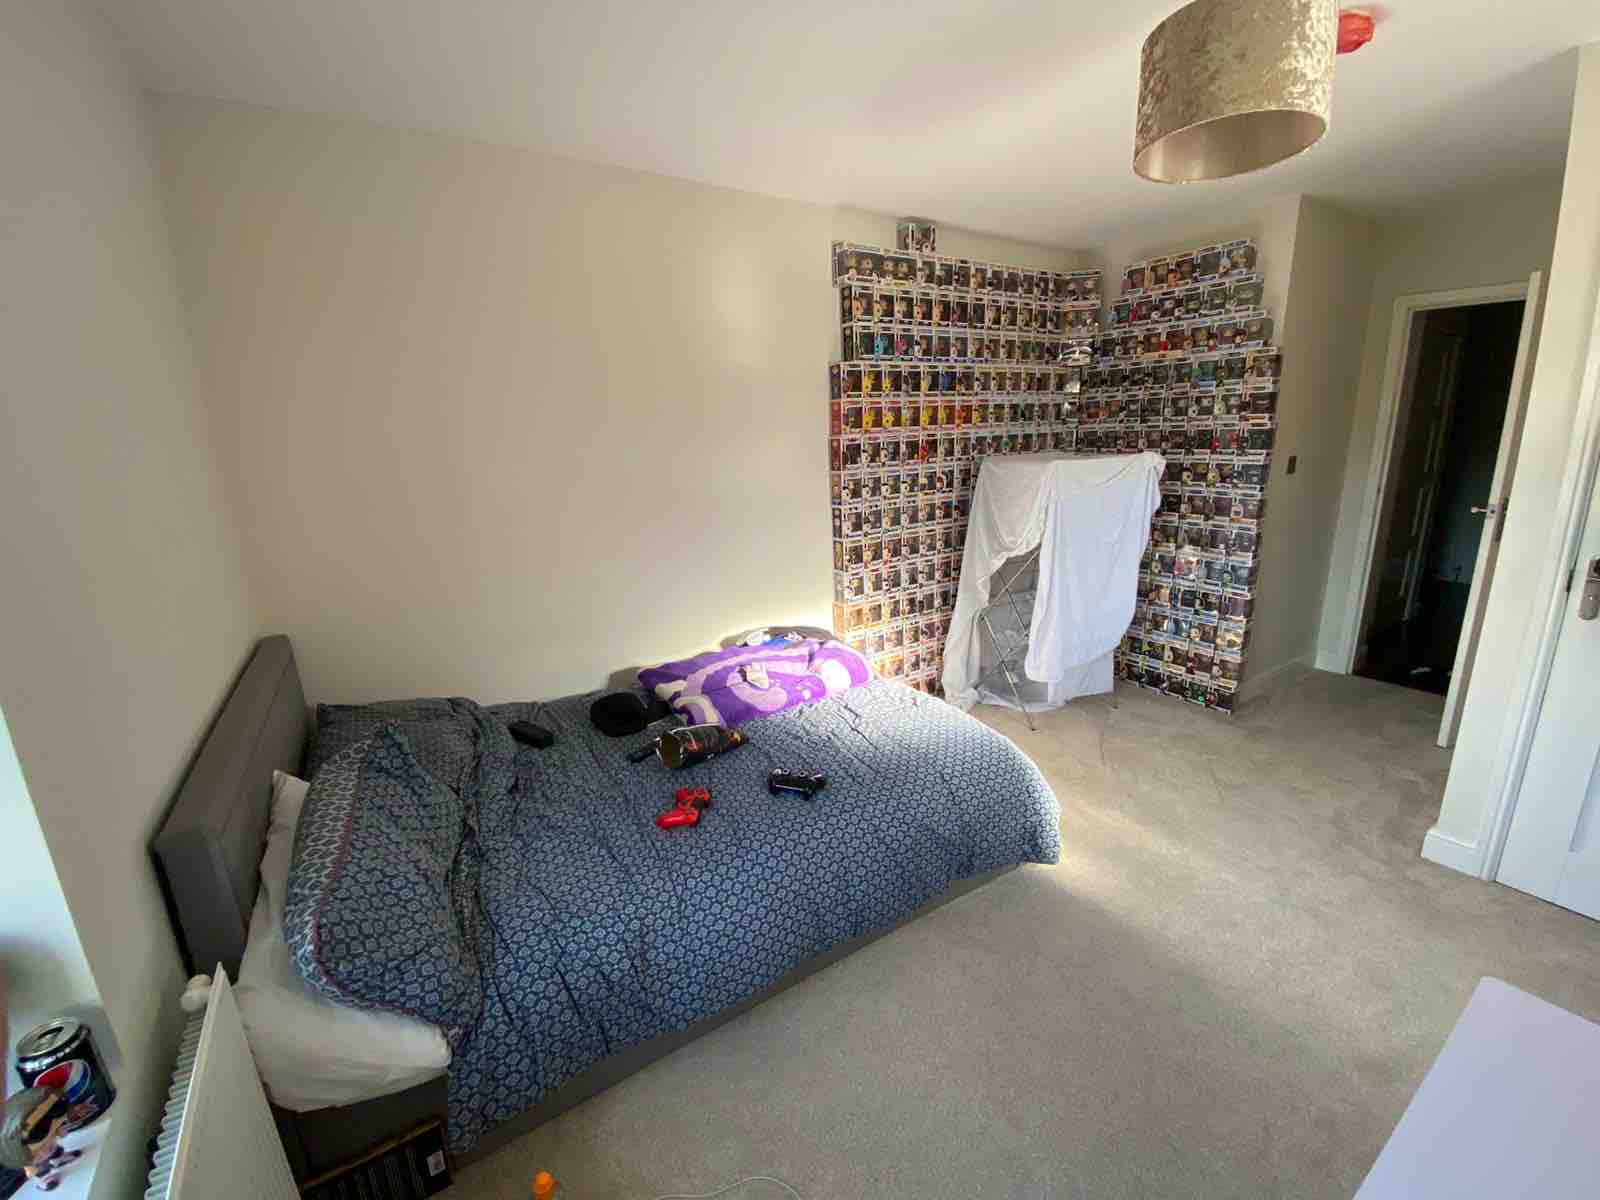 3 bedrooms RoomsLocal image